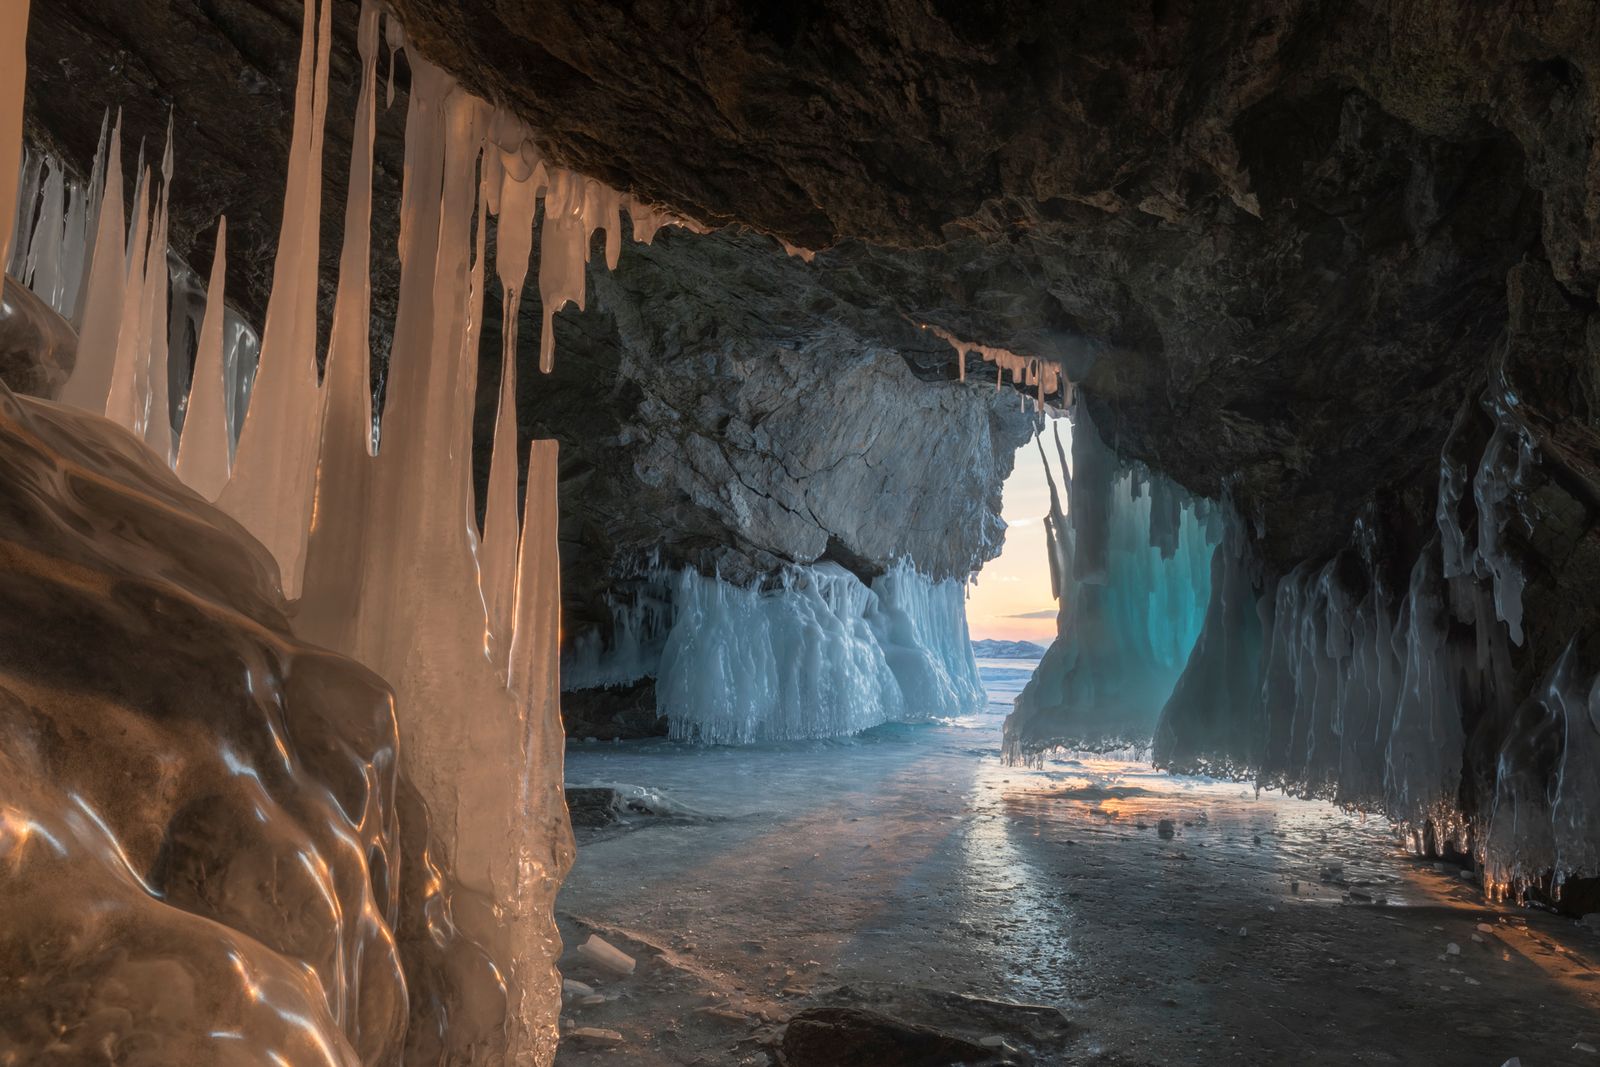 The Ice Grotto